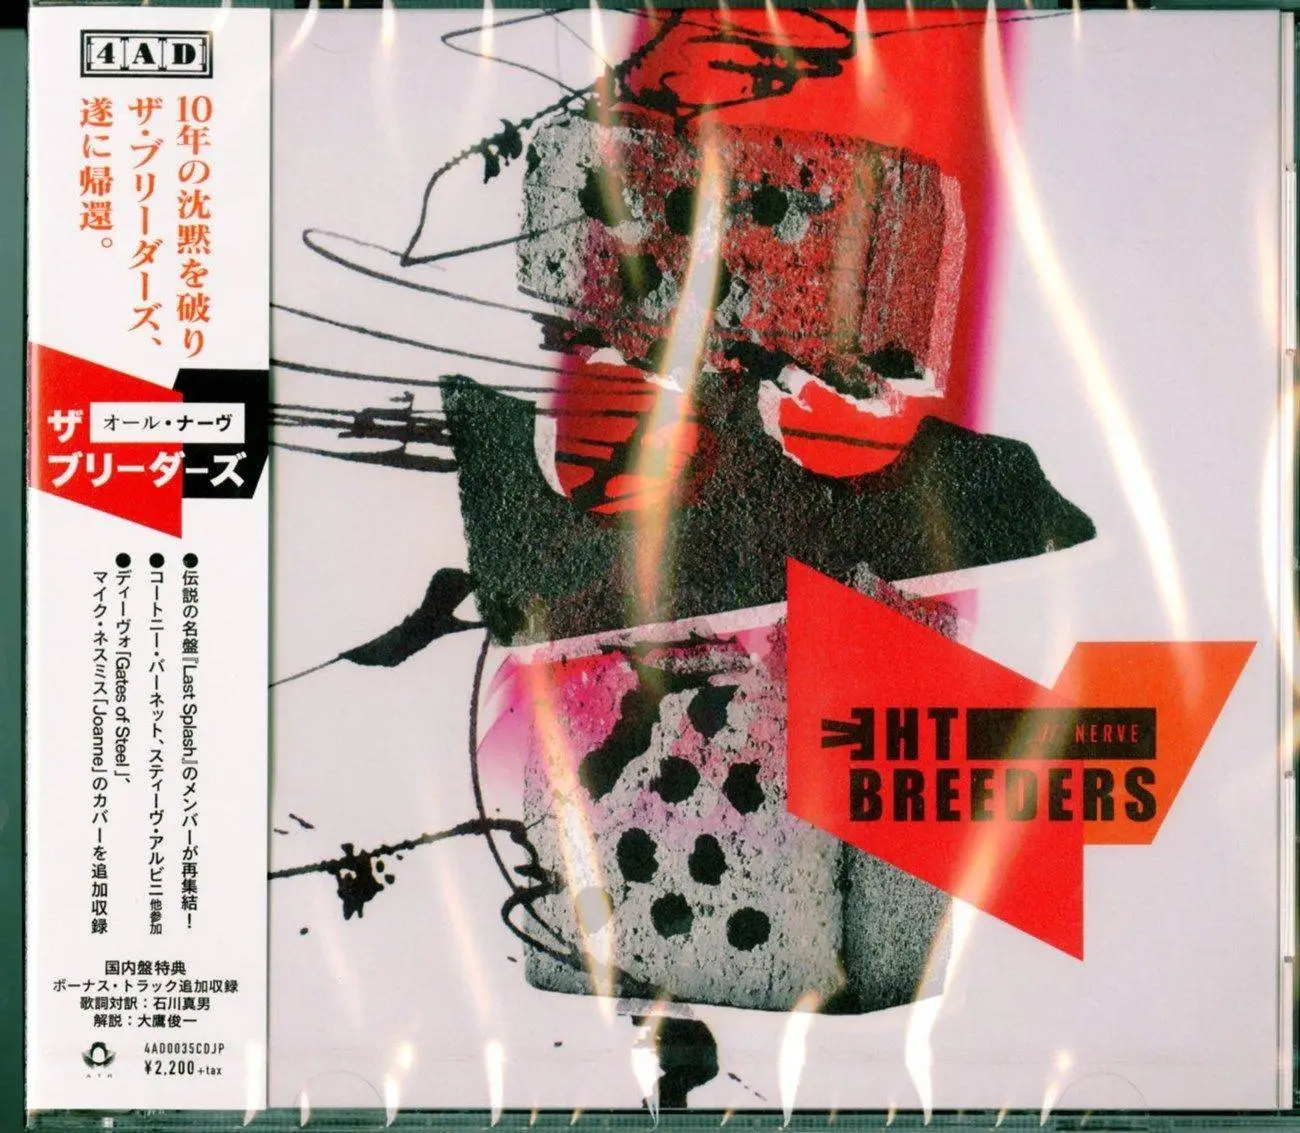 The Breeders All Nerve Japanese Edition 18 Avaxhome